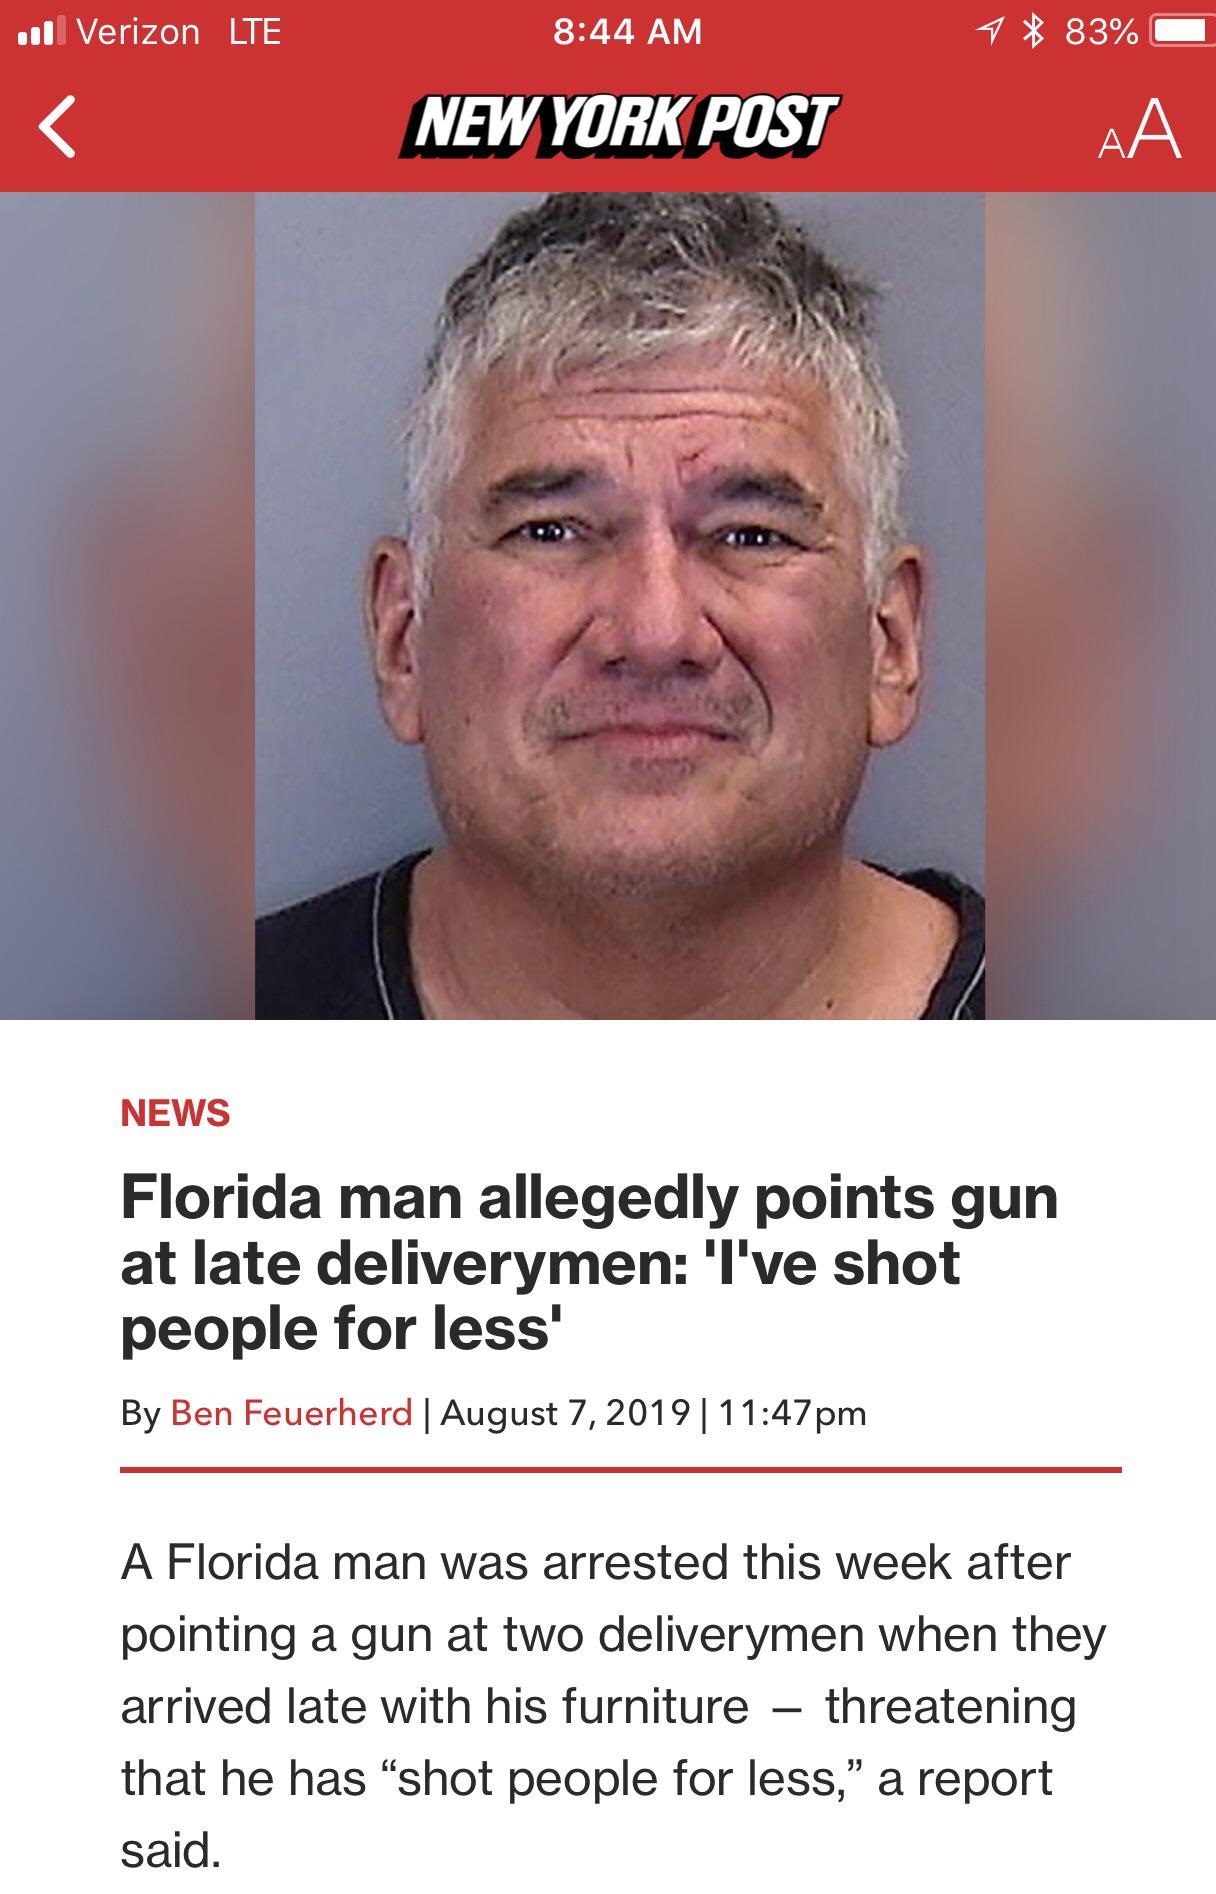 photo caption - ull Verizon Lte 1 83% New York Post Aa News Florida man allegedly points gun at late deliverymen 'I've shot people for less' By Ben Feuerherd | |pm A Florida man was arrested this week after pointing a gun at two deliverymen when they arri